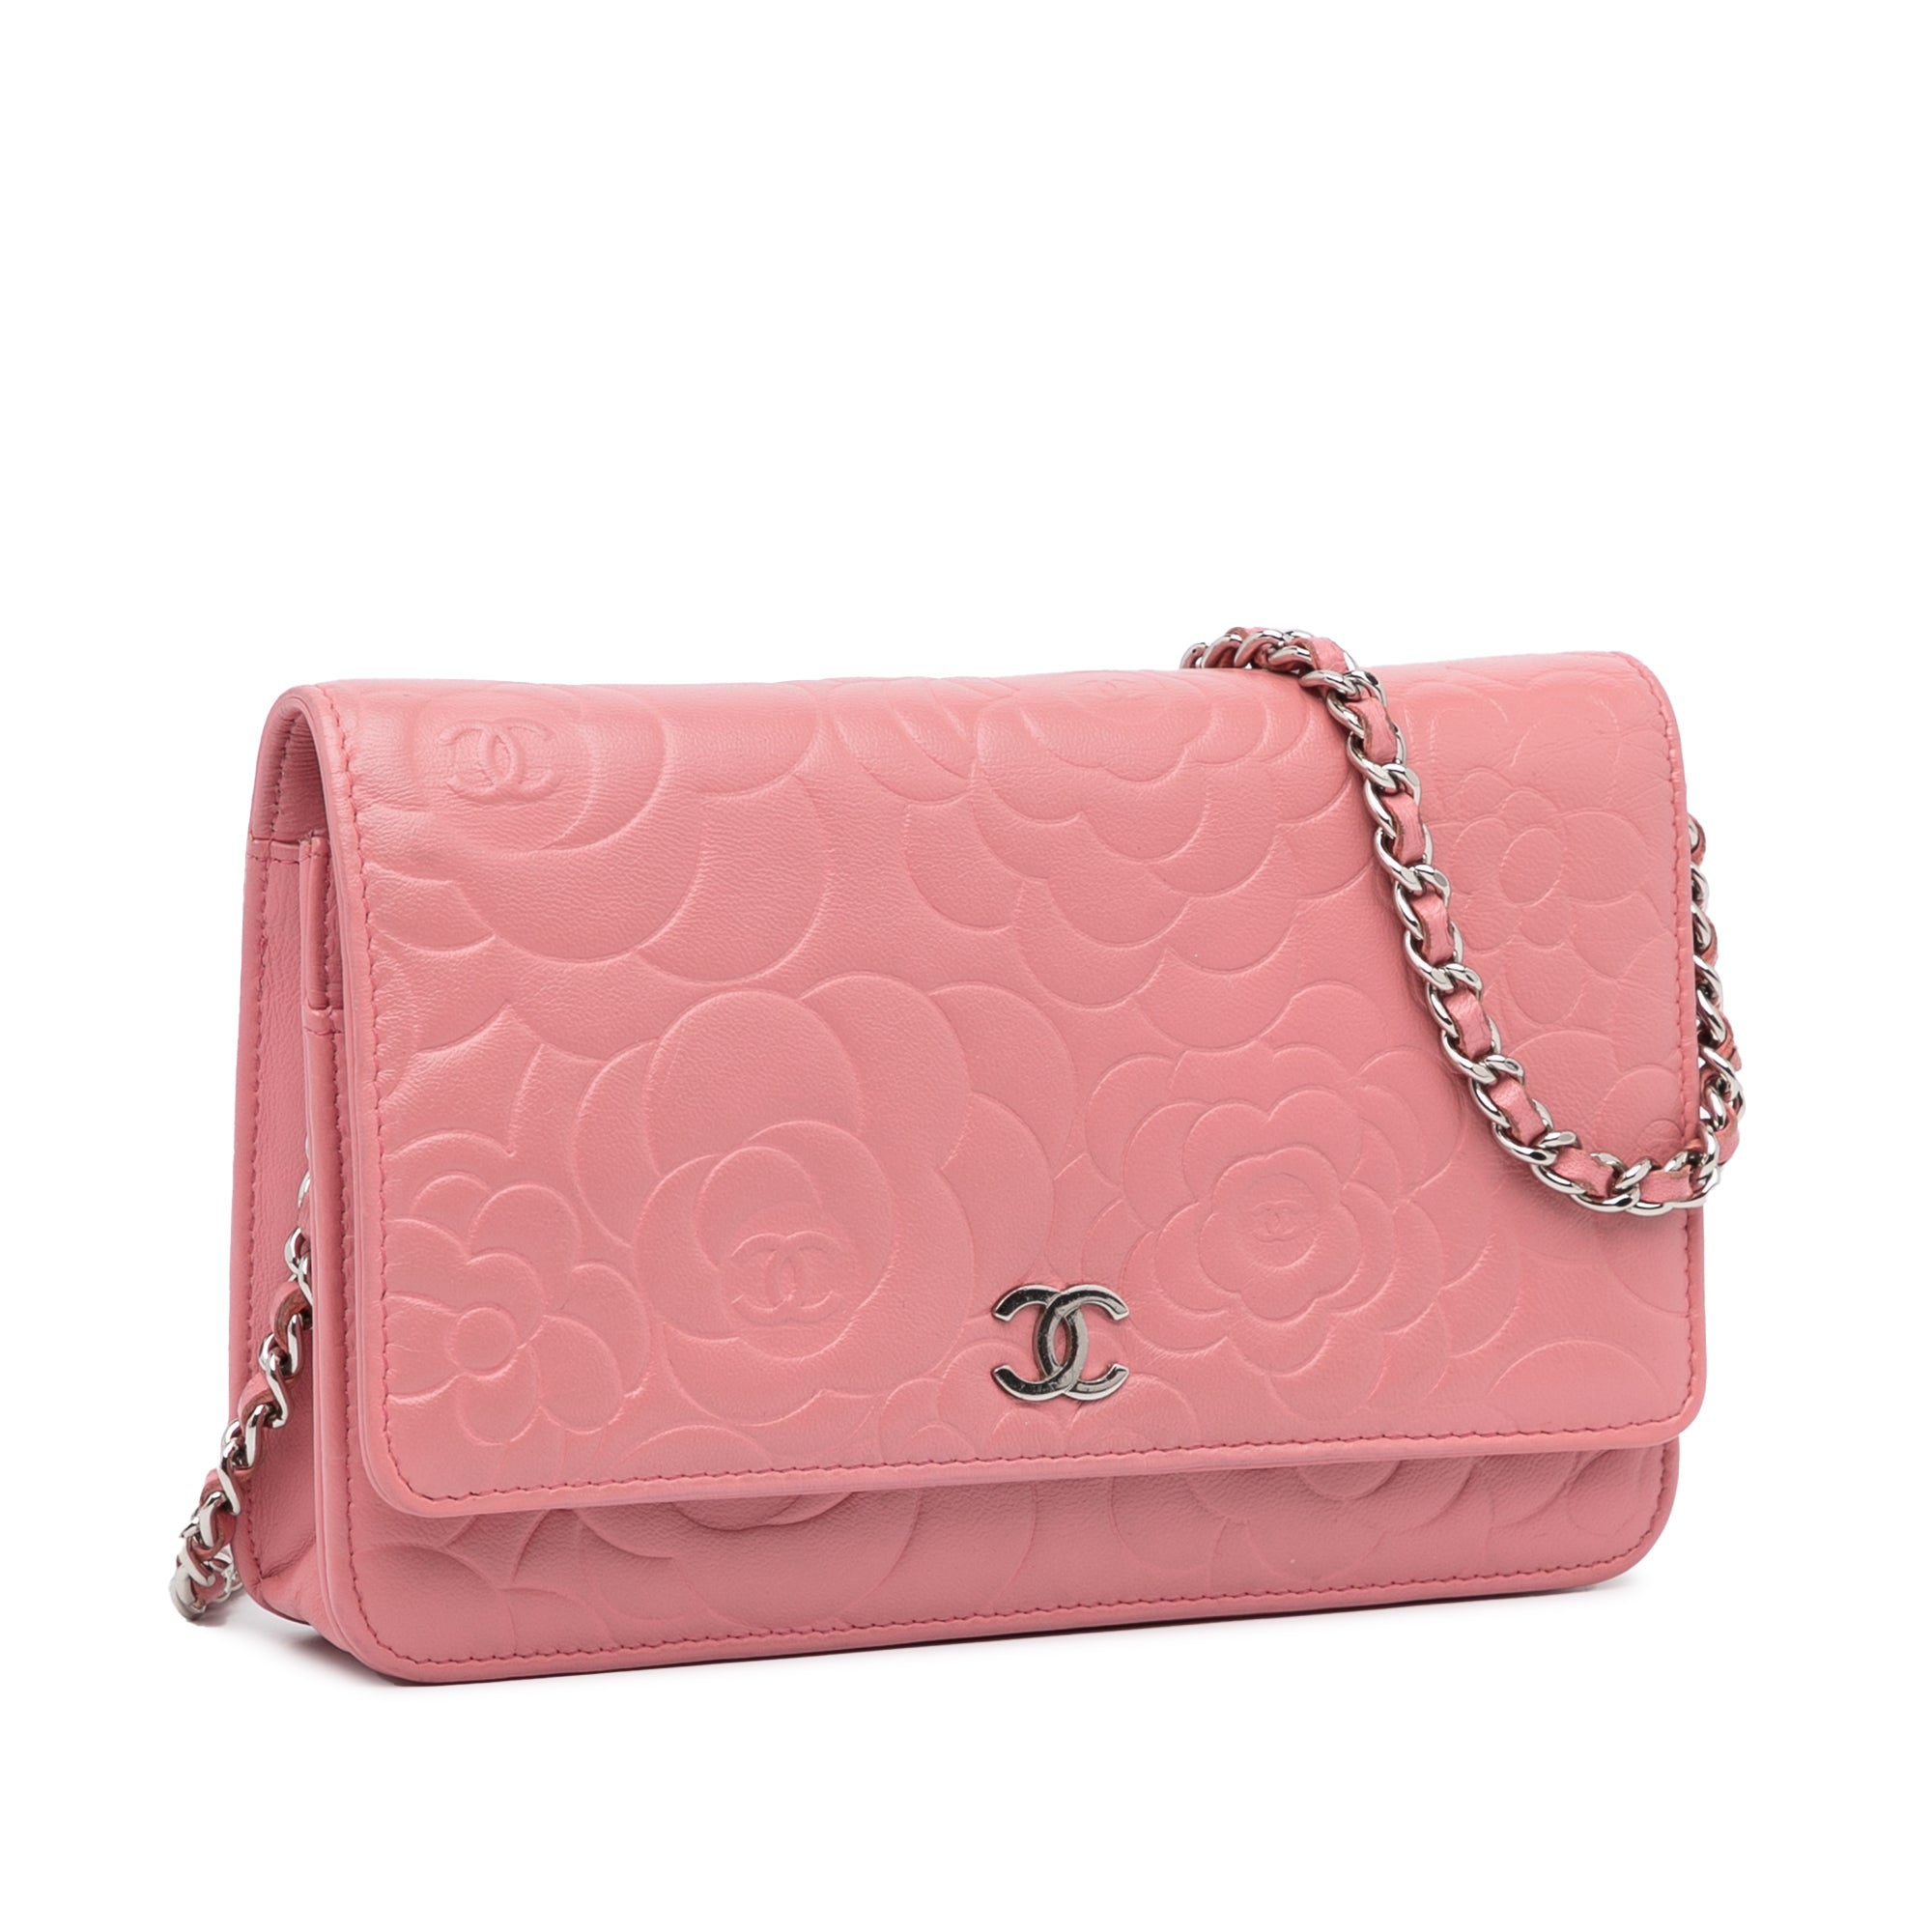 Chanel - Authenticated Clutch Bag - Cloth Pink For Woman, Good condition